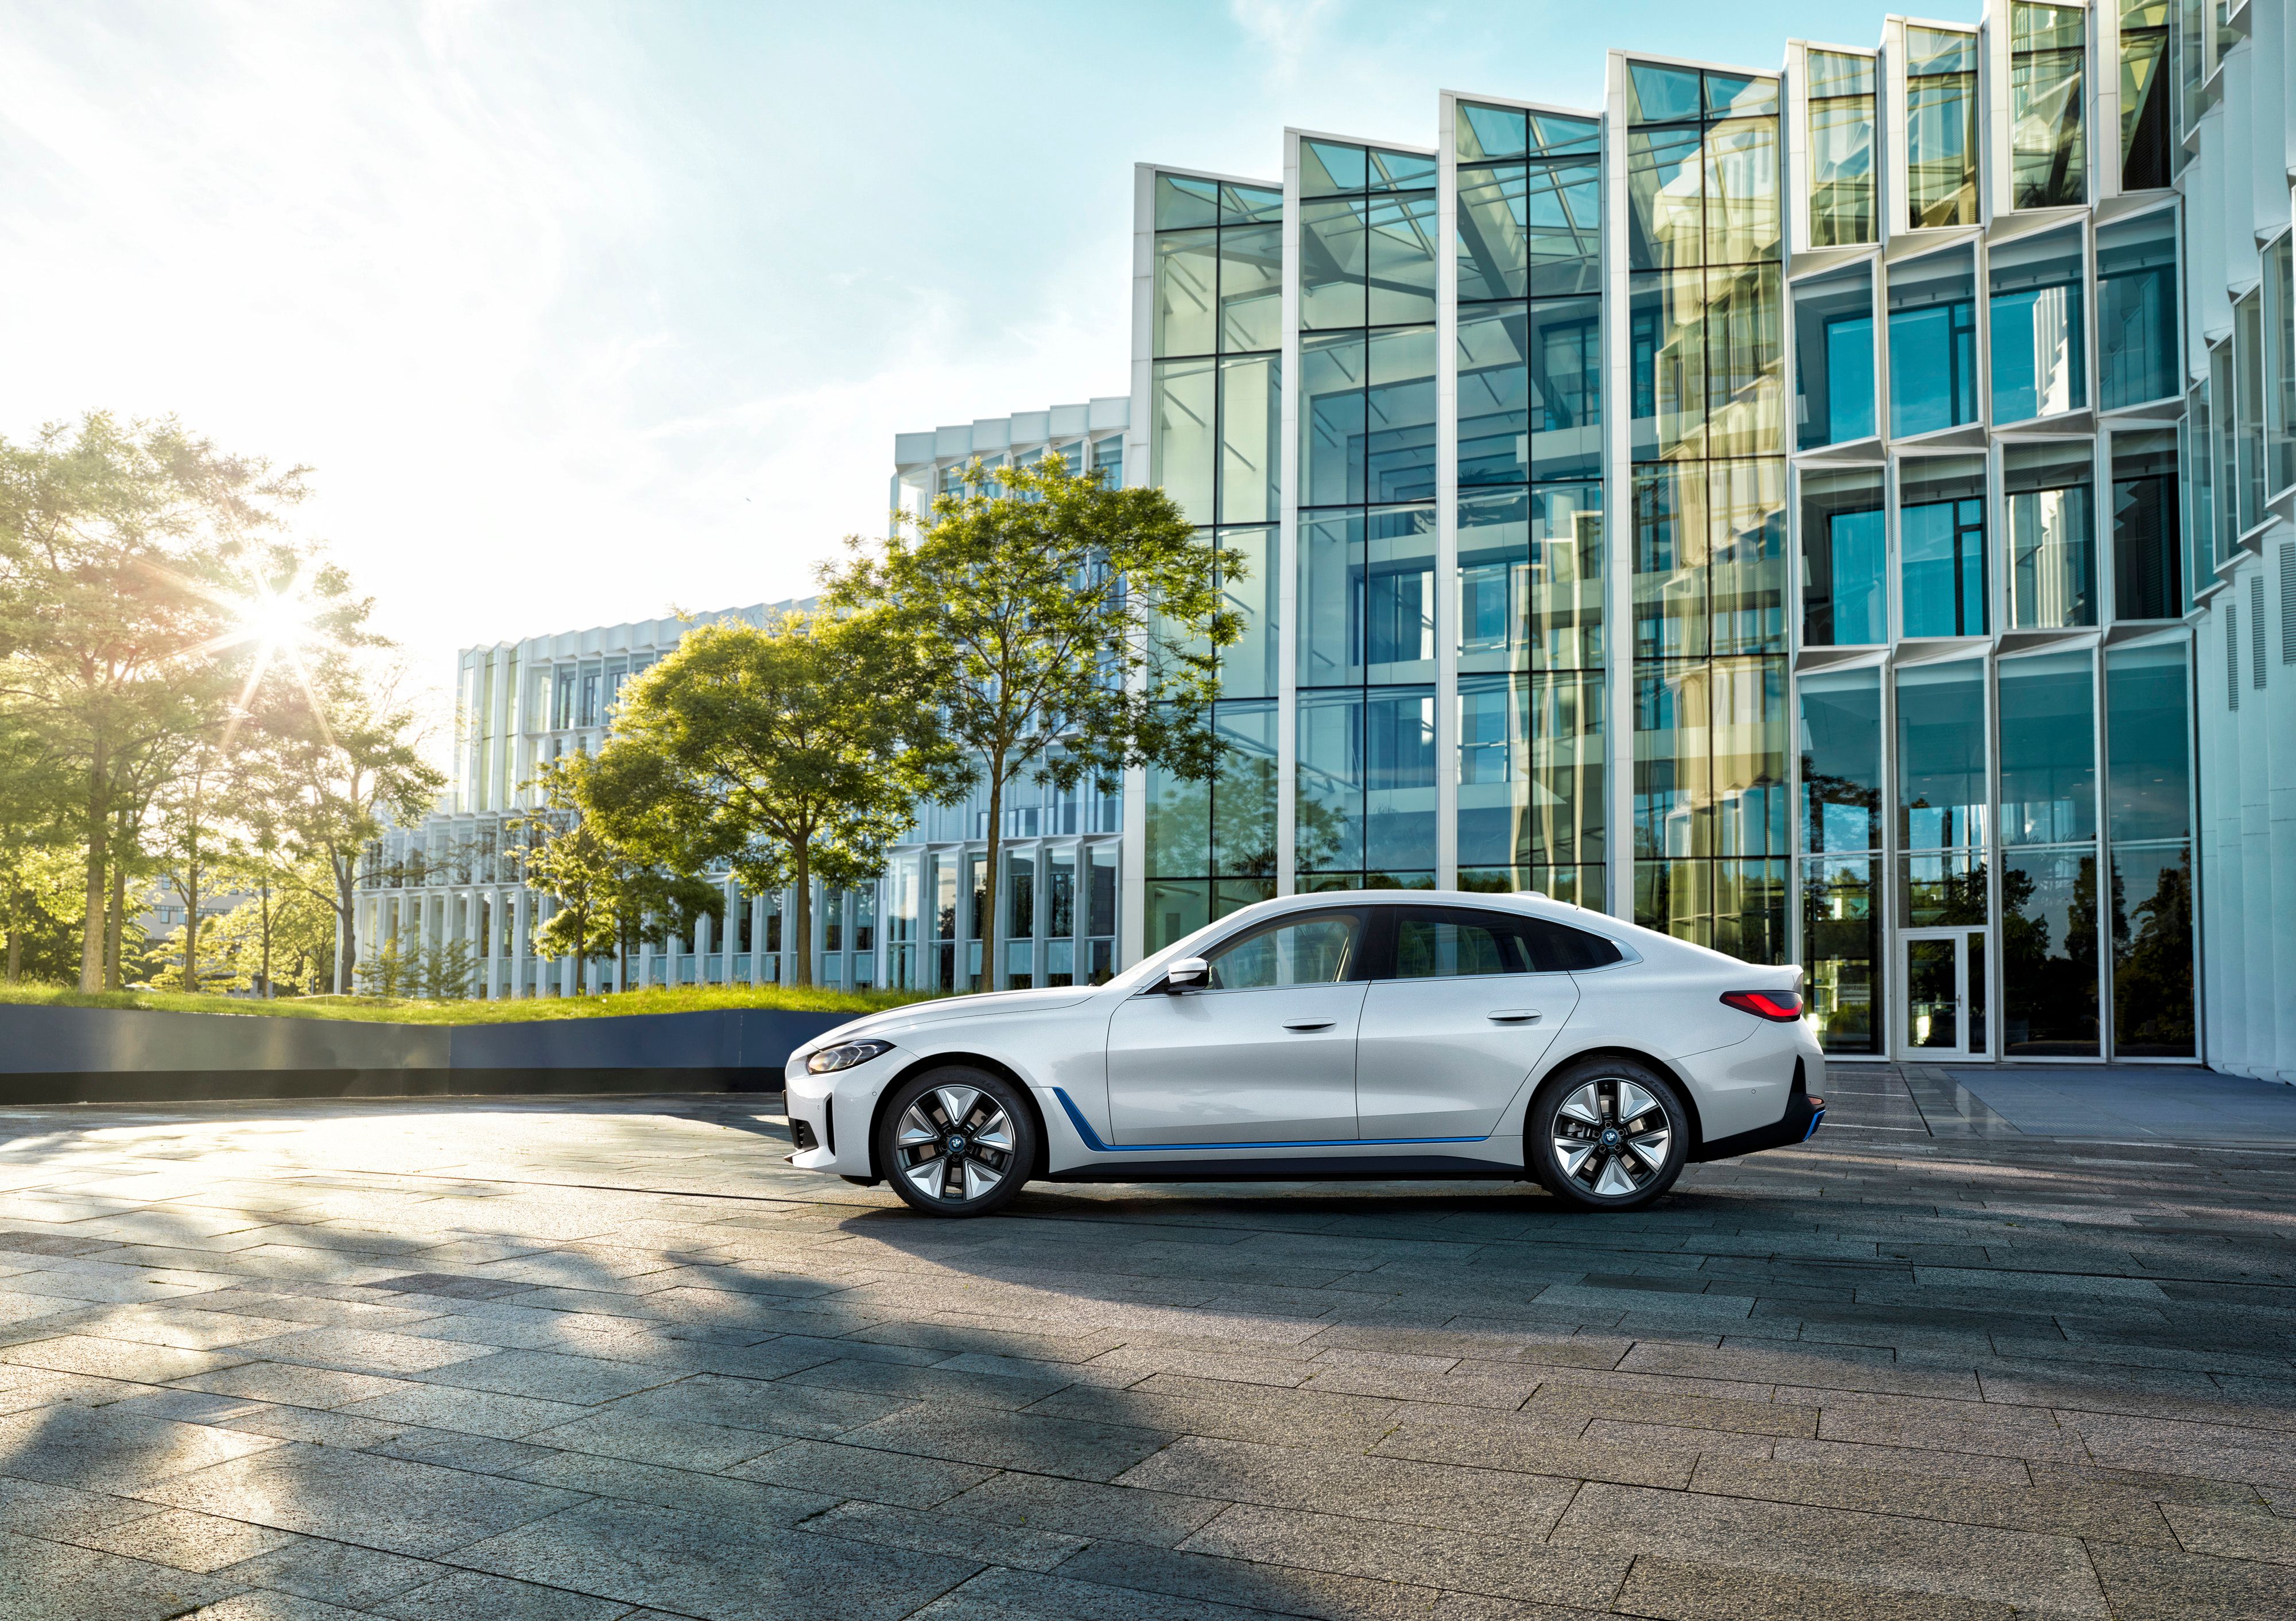 2022 BMW i4 - This Is The German Automaker's Answer To The Tesla Model 3